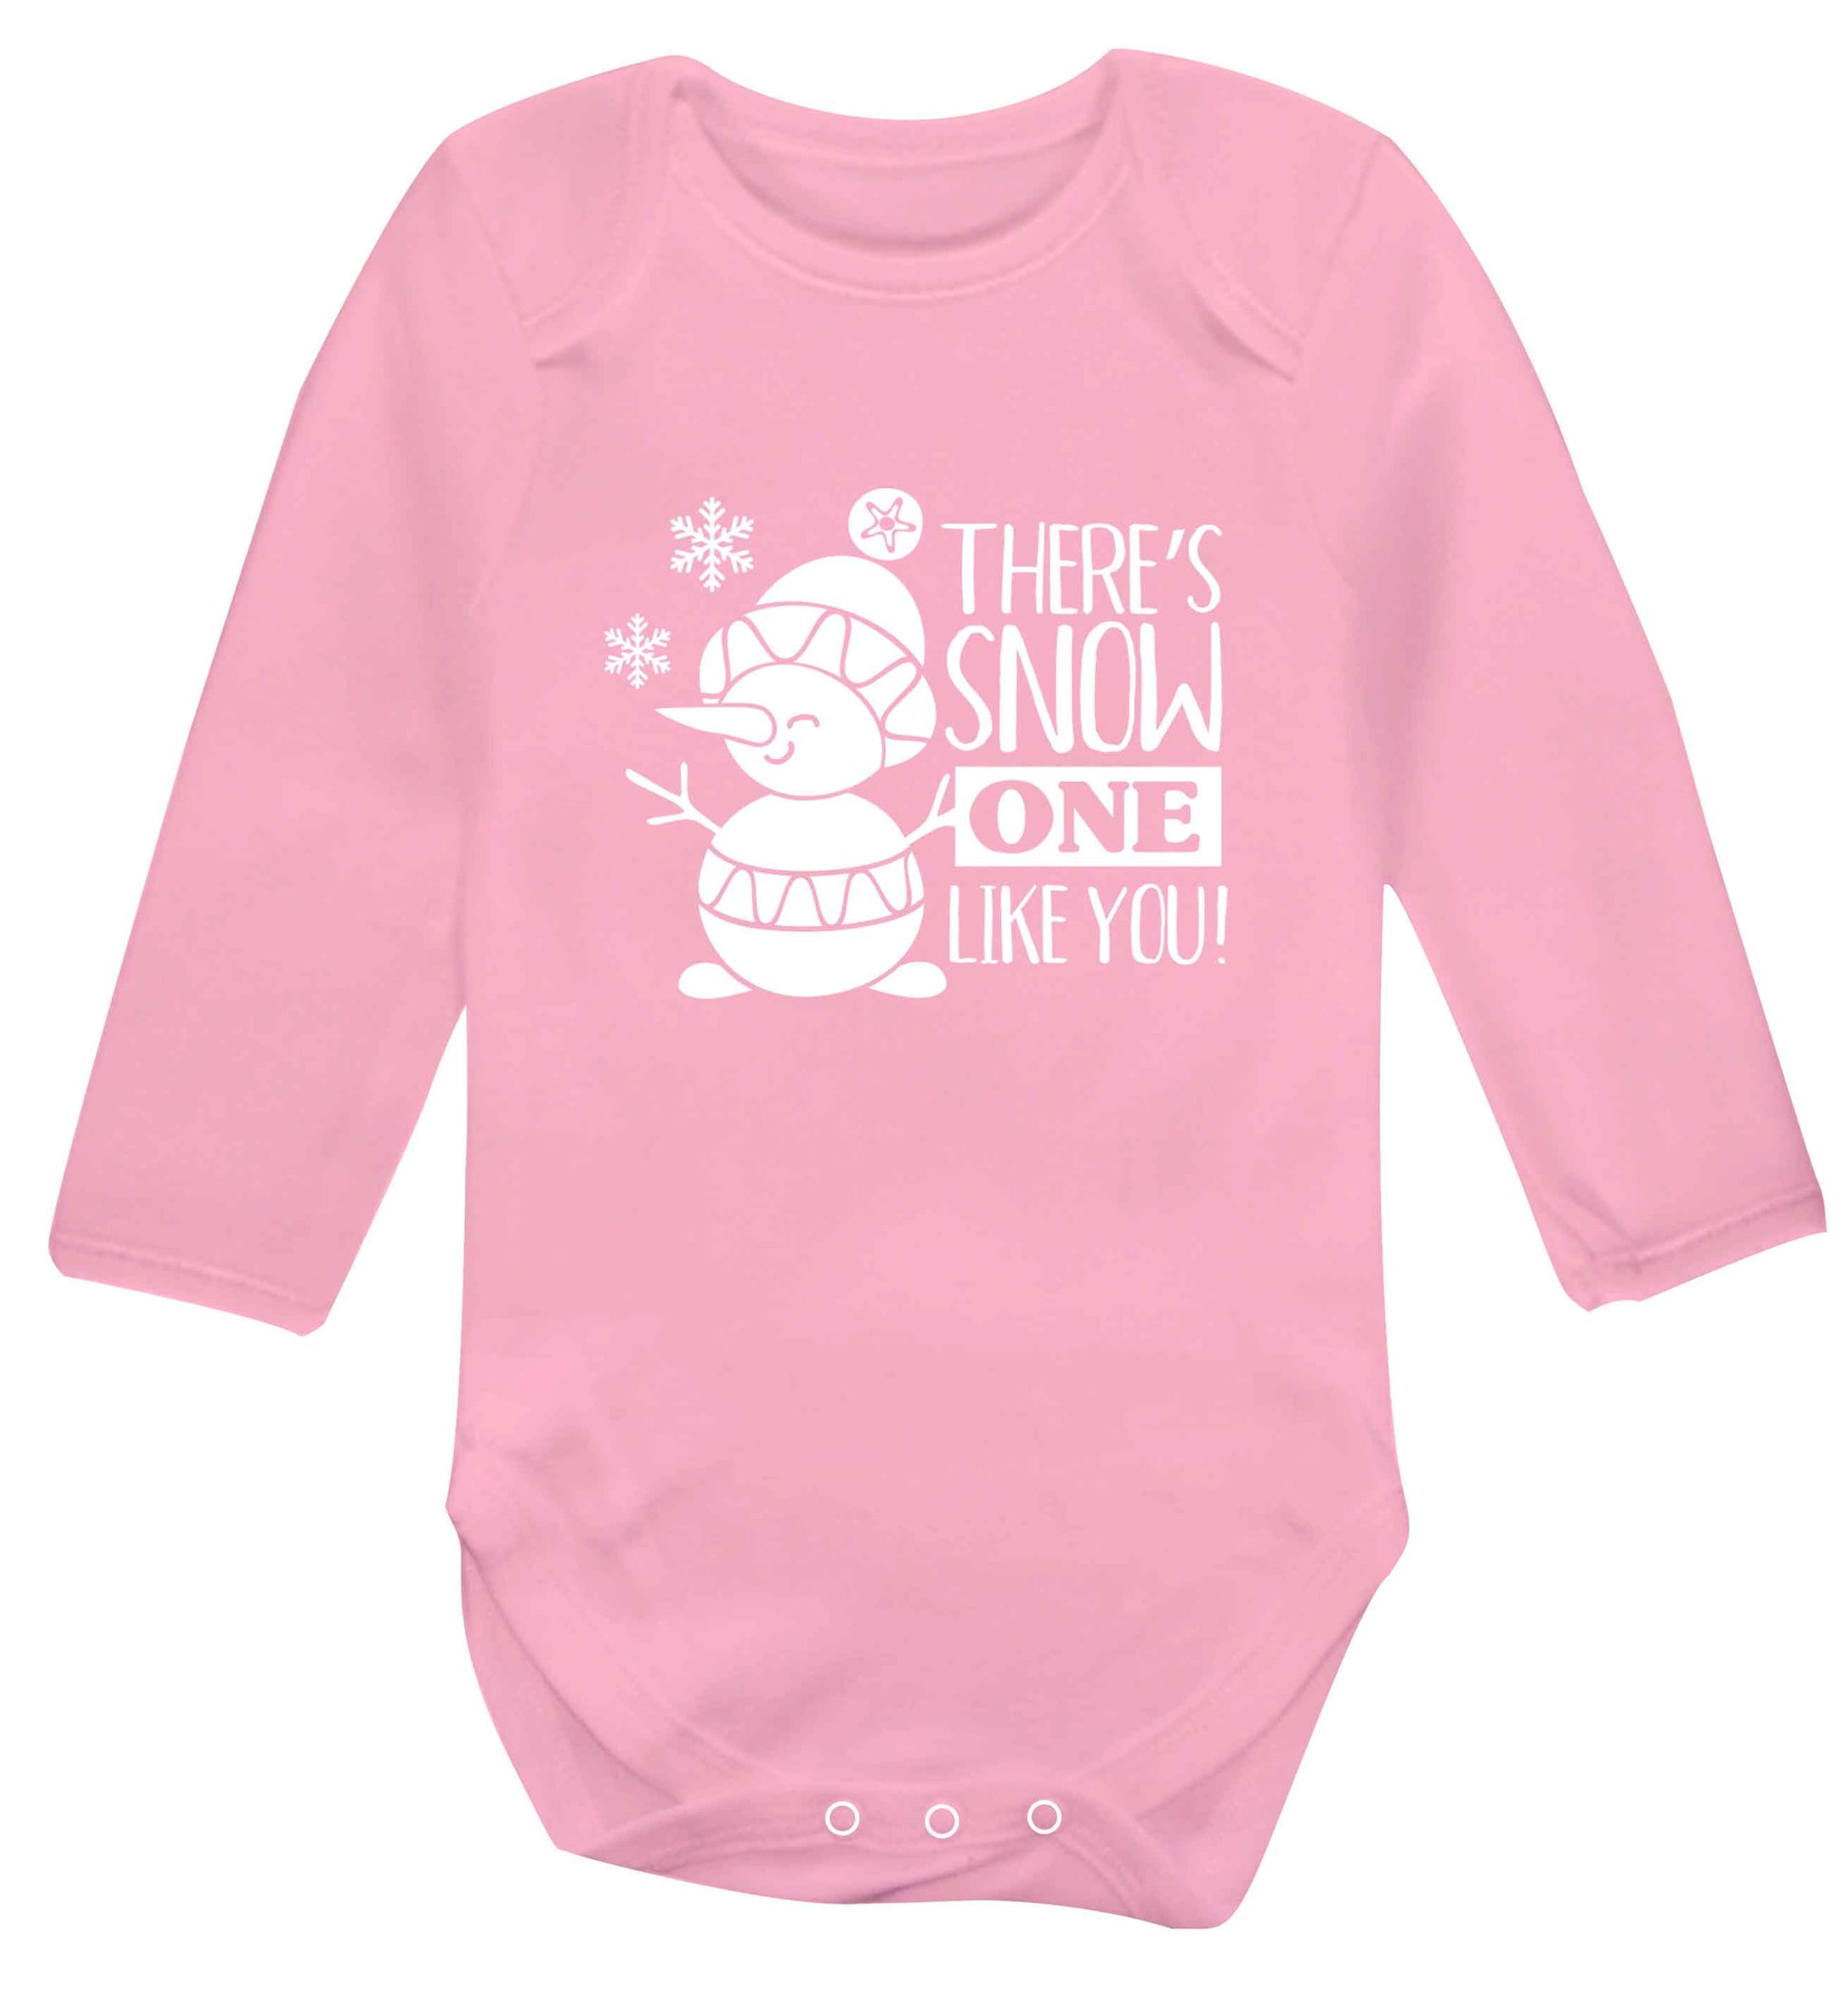 There's snow one like you baby vest long sleeved pale pink 6-12 months